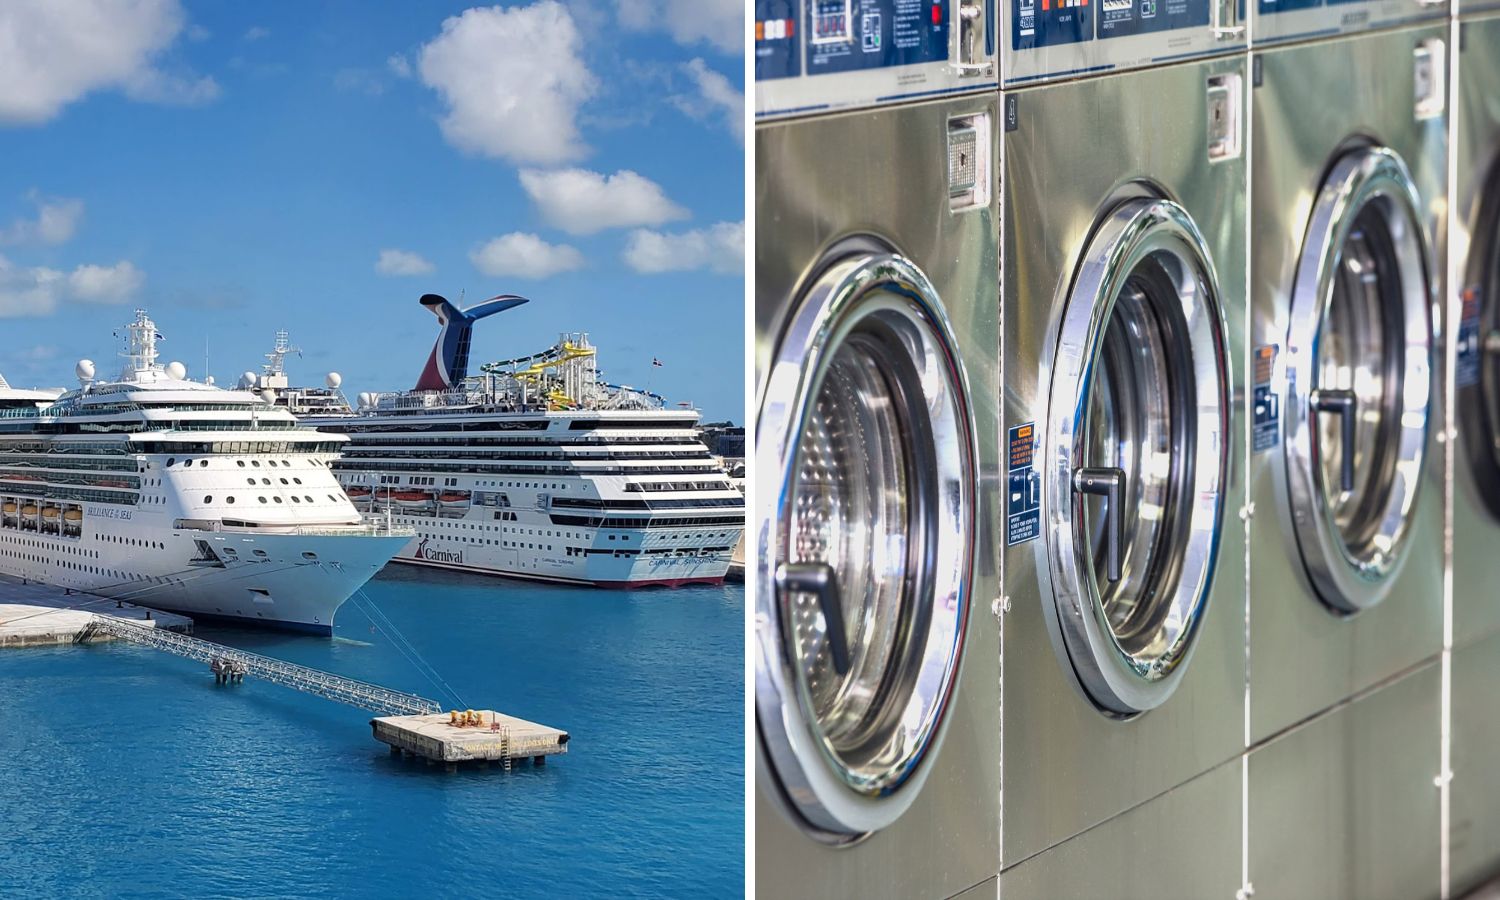 Which cruise ships have laundry rooms?